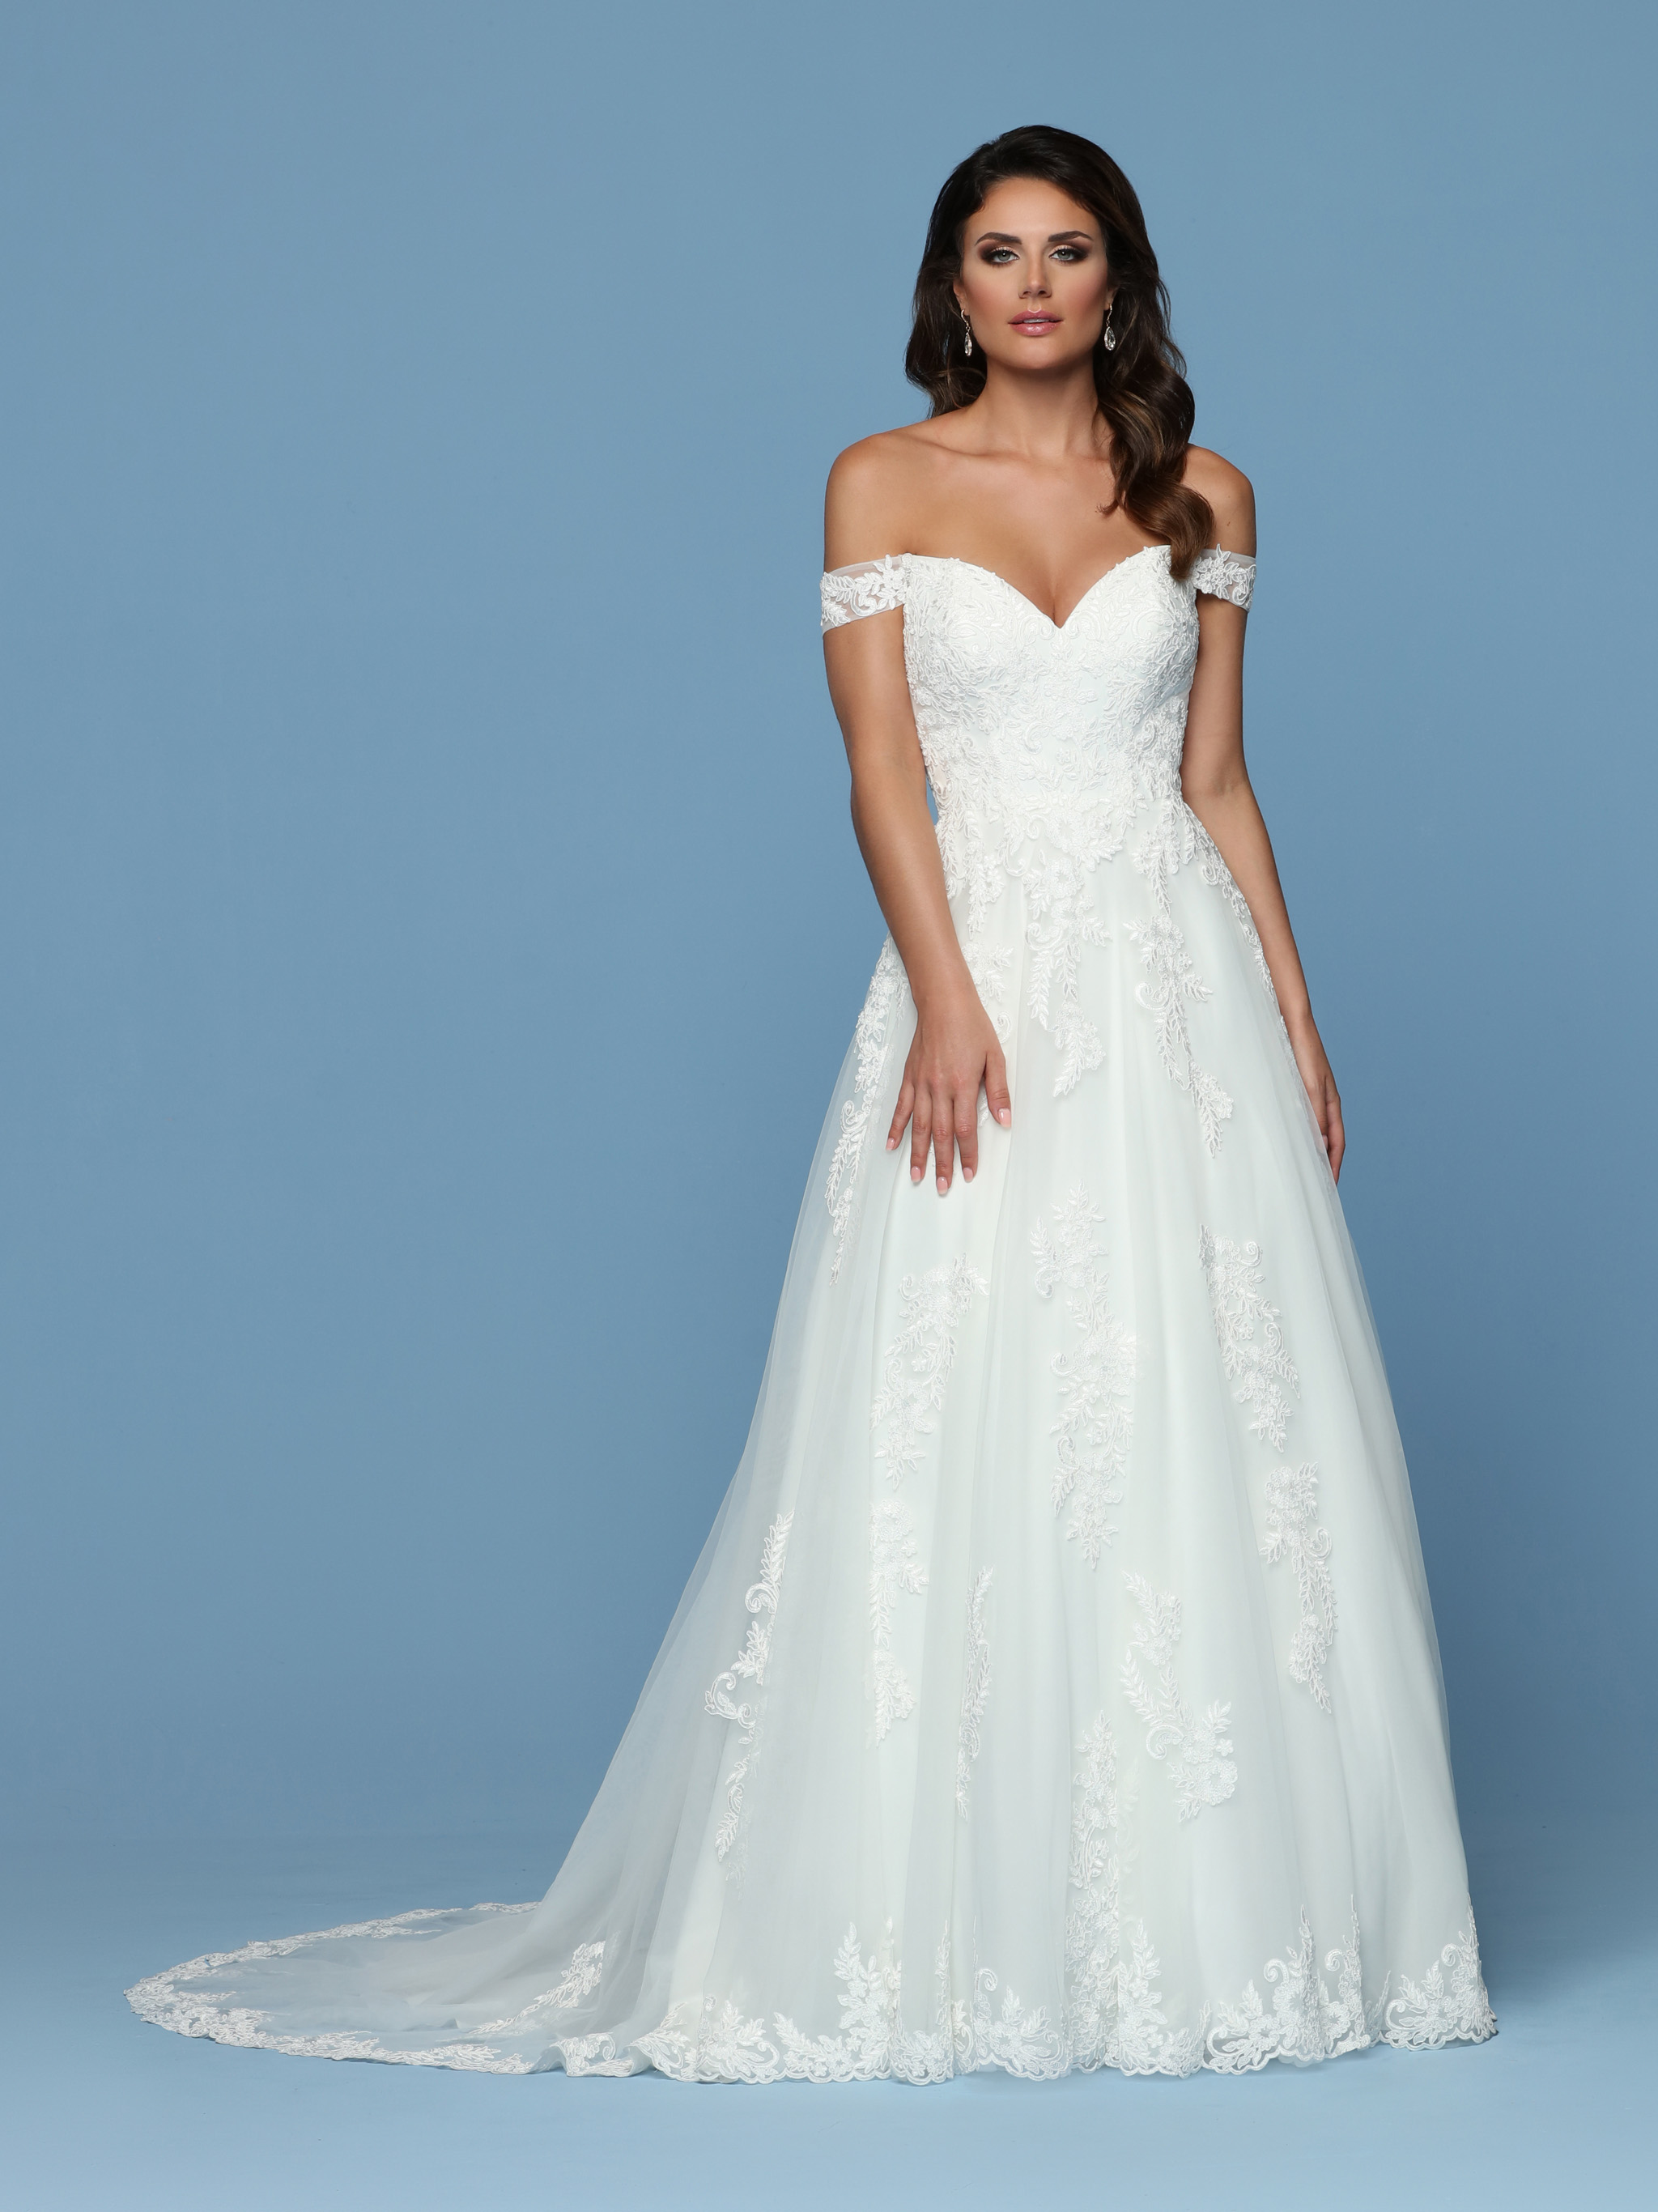 Off the Shoulder Wedding Dresses & Gowns for 2020